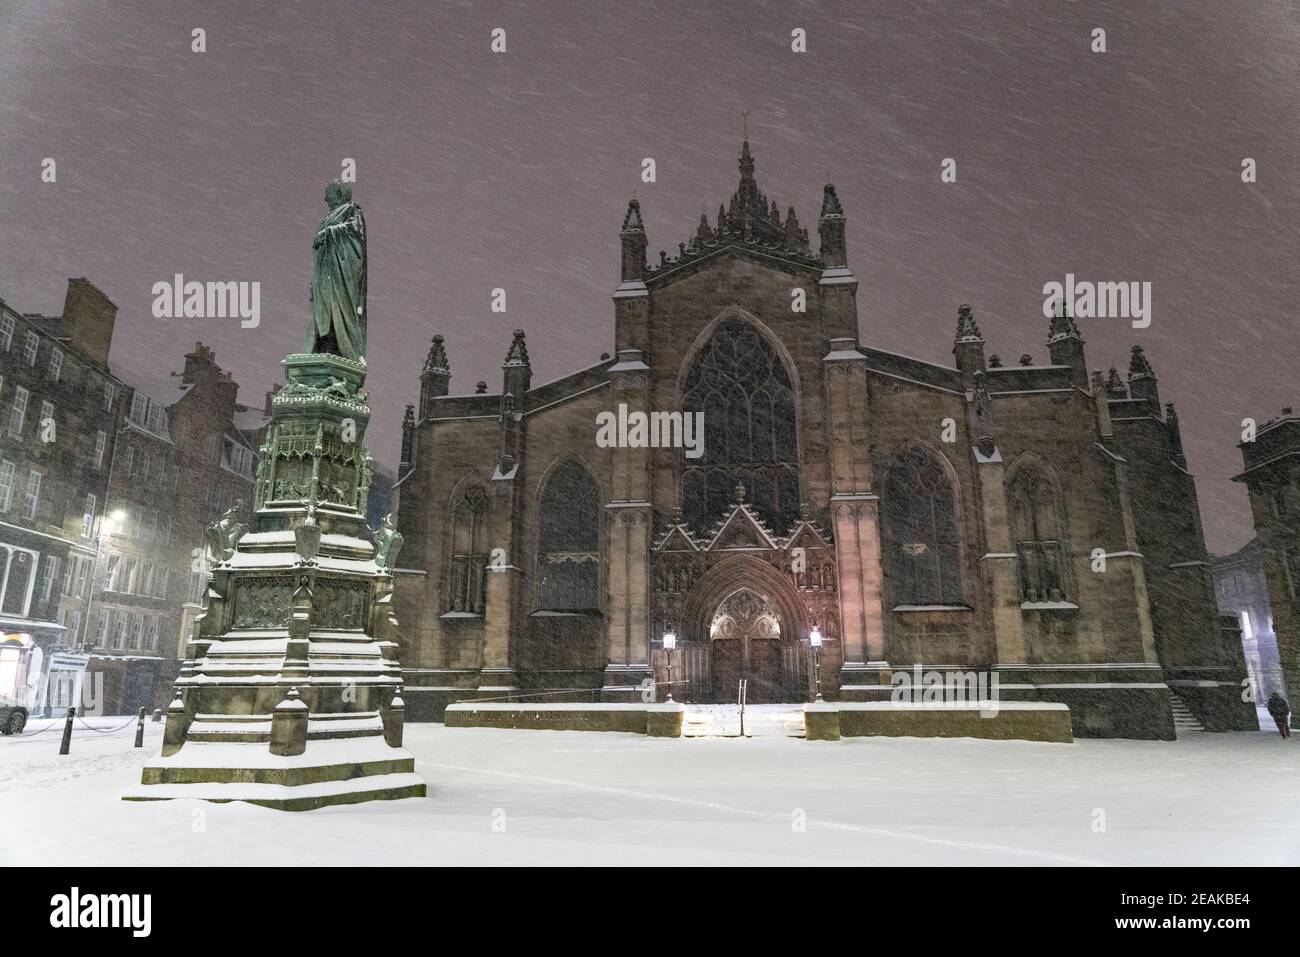 Edinburgh, Scotland, UK. 10 Feb 2021. Big freeze continues in the UK with heavy overnight and morning snow in the city. Pic; Parliament Square and St Giles Cathedral in the early morning snow blizzards. Iain Masterton/Alamy Live news Stock Photo